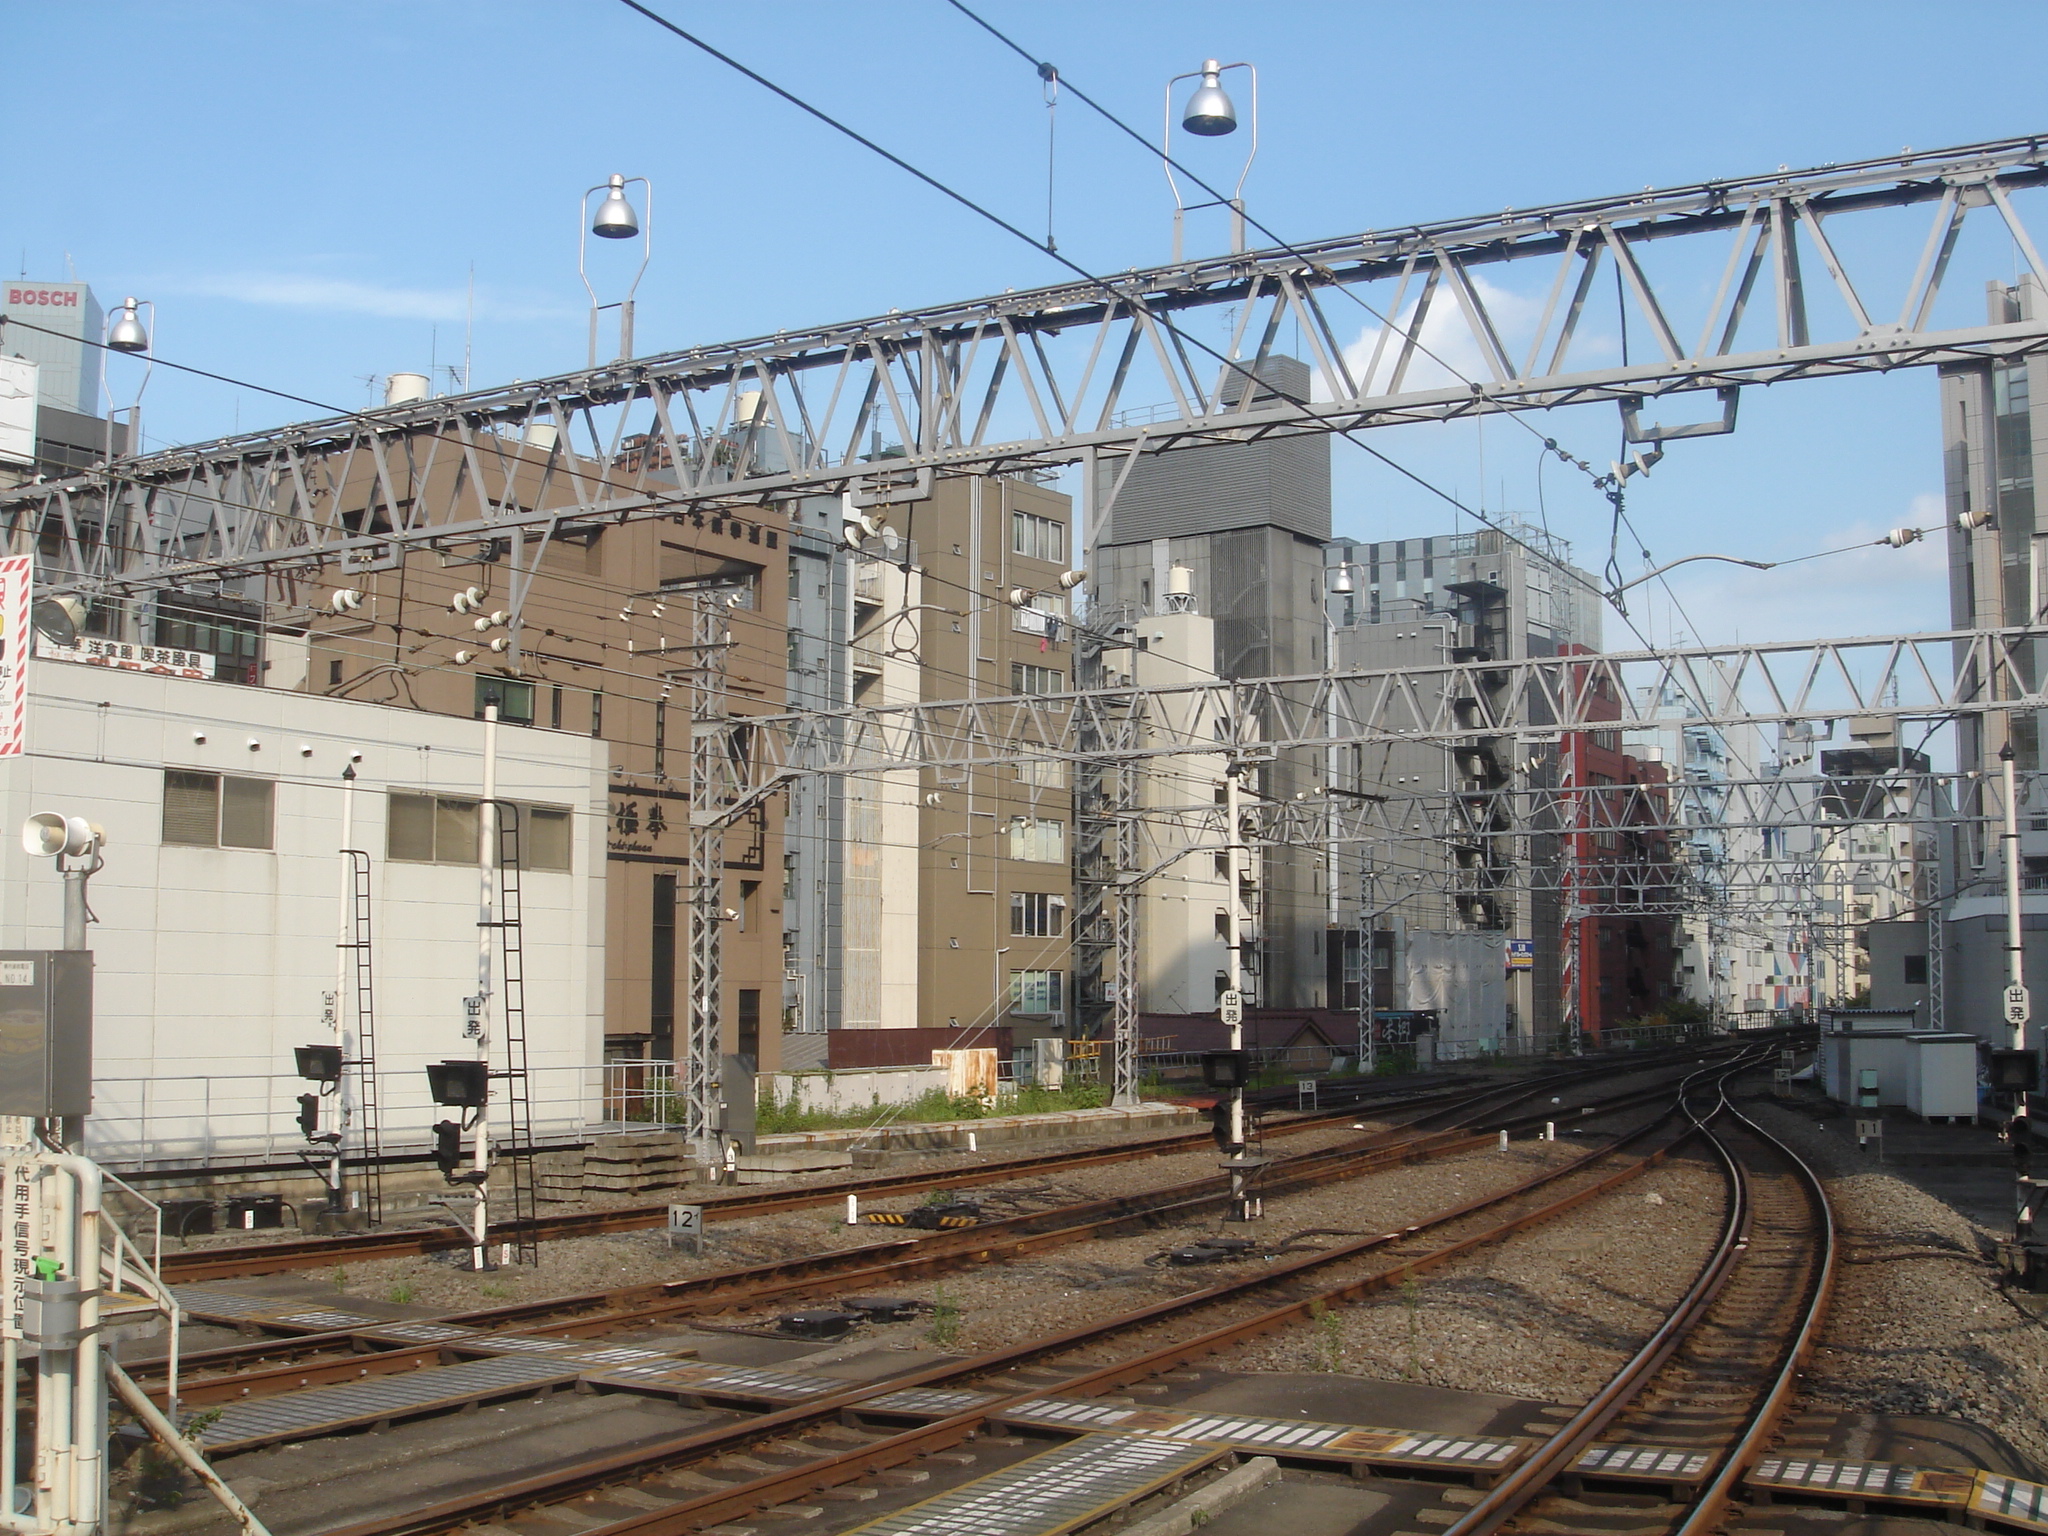 a picture of some buildings on a train track